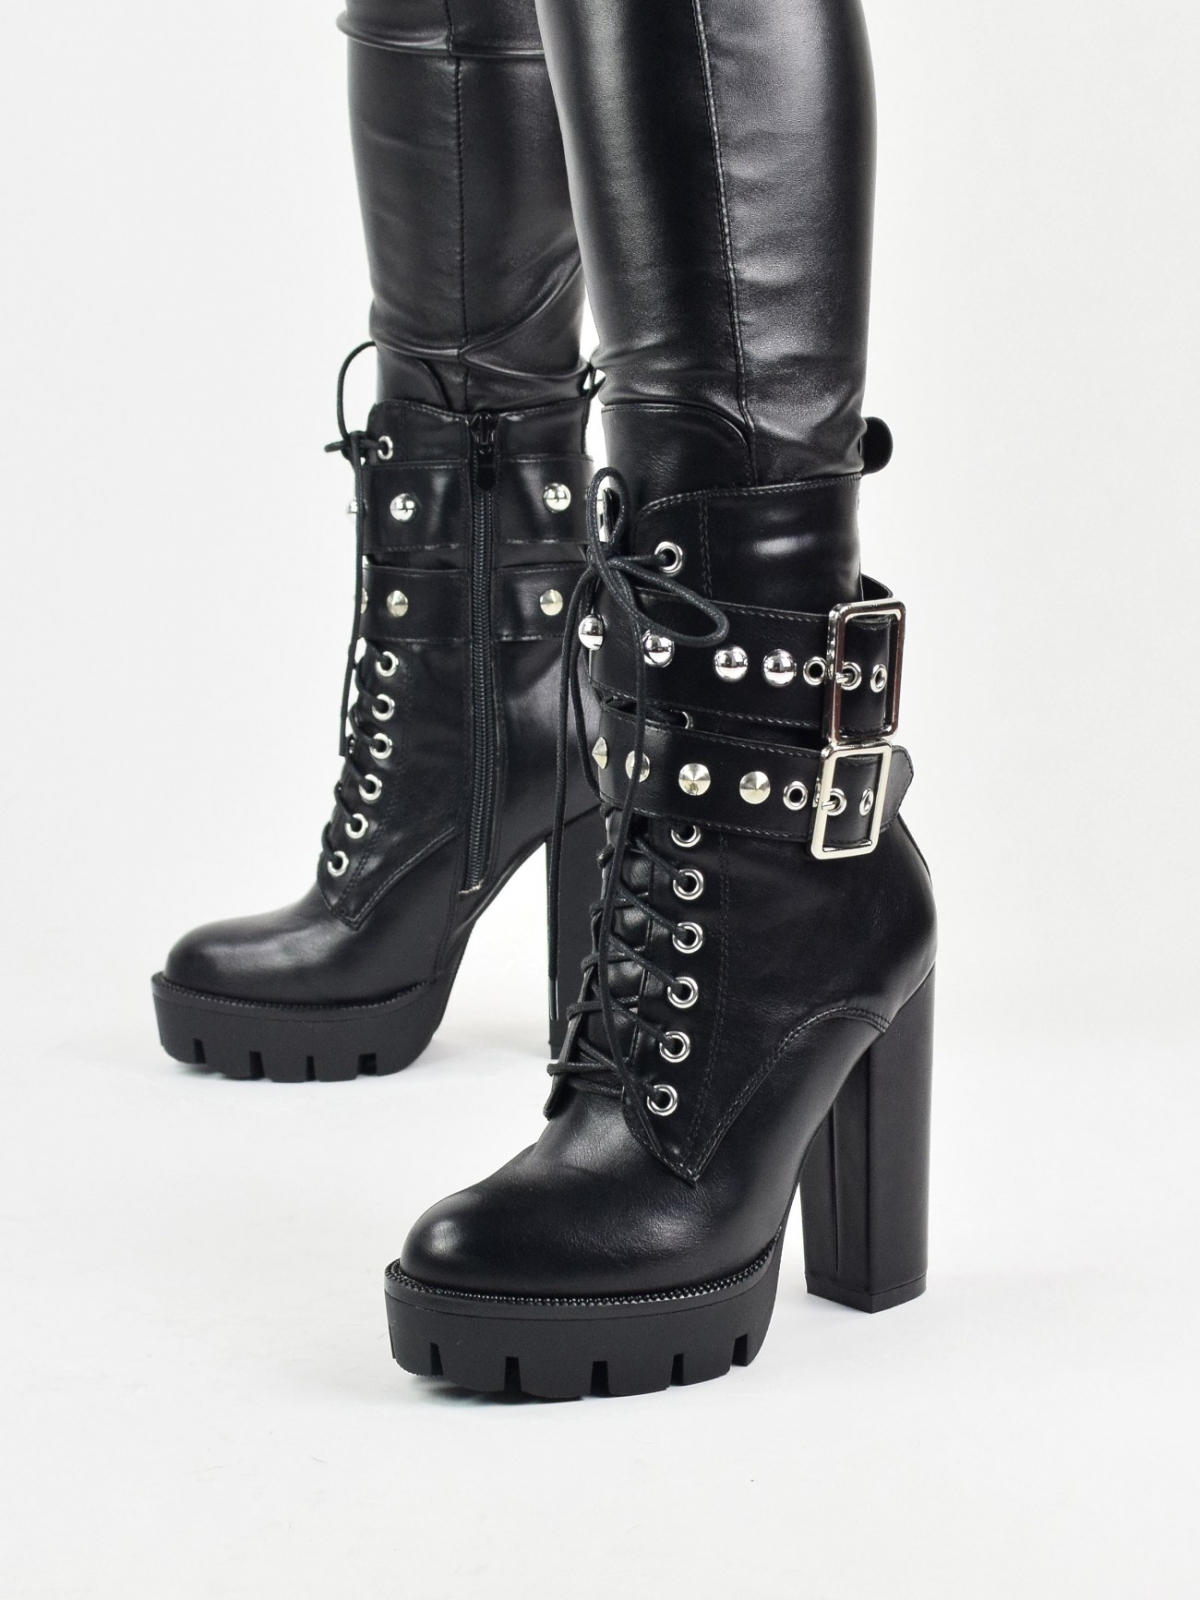 High block heeled lace up platform boots with side zip & front metal details in black